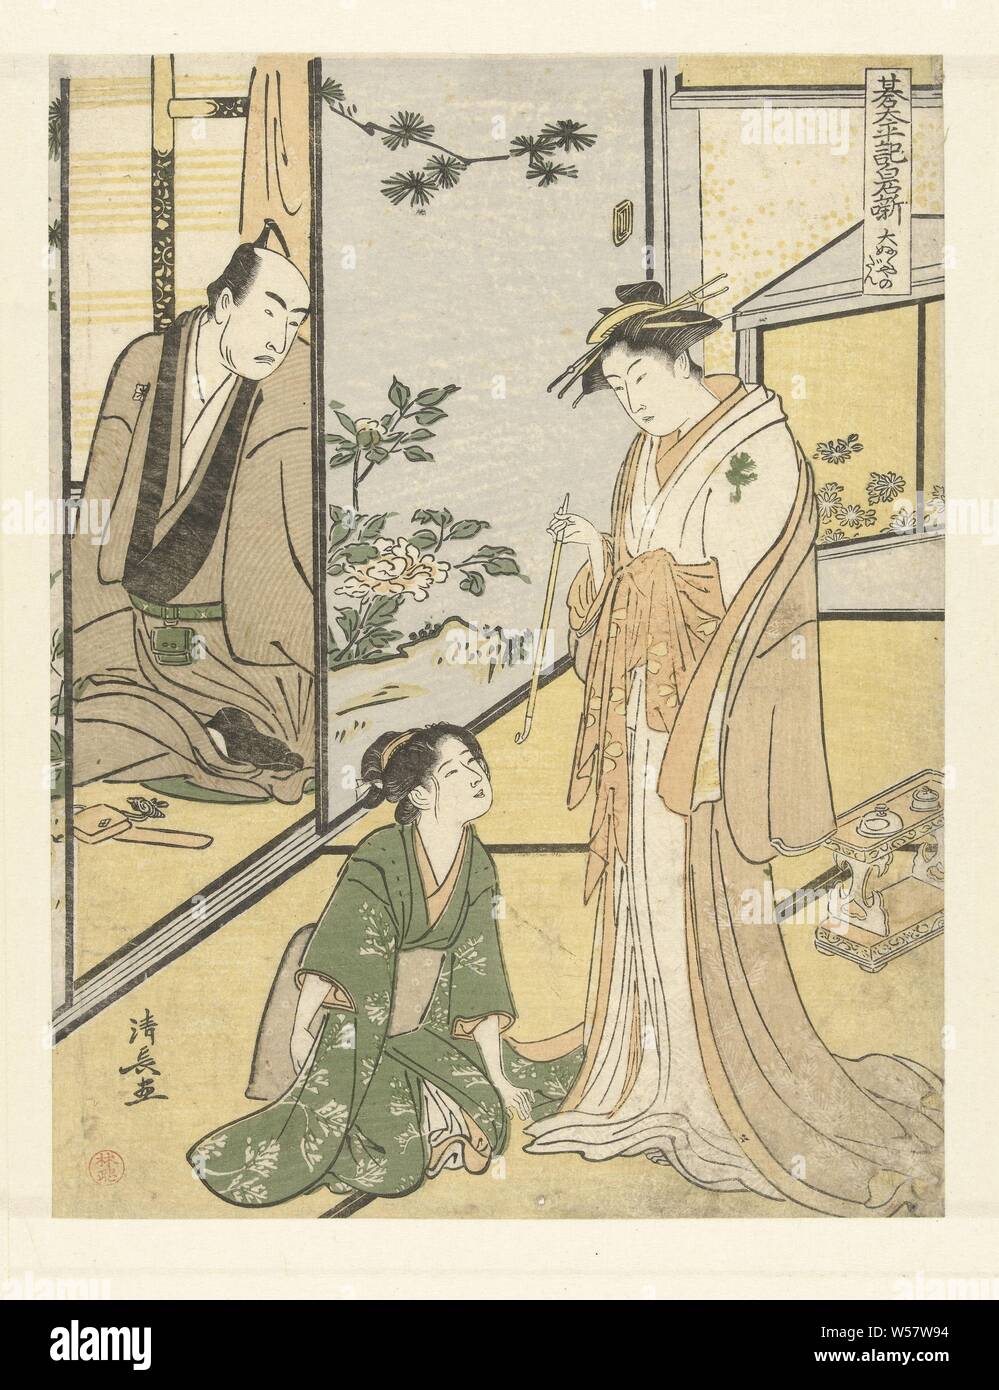 Scene in the Daifukuya house Daifukuya no dan (title on object) The play Shiraishibanashi (series title) Gotaiheiki Shiraishibanashi (series title on object), Courtisane Miyagino, standing with pipe in right hand, listening to her sister Shinobu, sitting in green kimono, telling about the death of their father, while the manager of the Daifukuya house, Soroku, whispers them from behind a sliding door, pipe, tobacco, Torii Kiyonaga (mentioned on object), Japan, 1783 - 1787, paper, colour woodcut, h 246 mm × w 188 mm Stock Photo